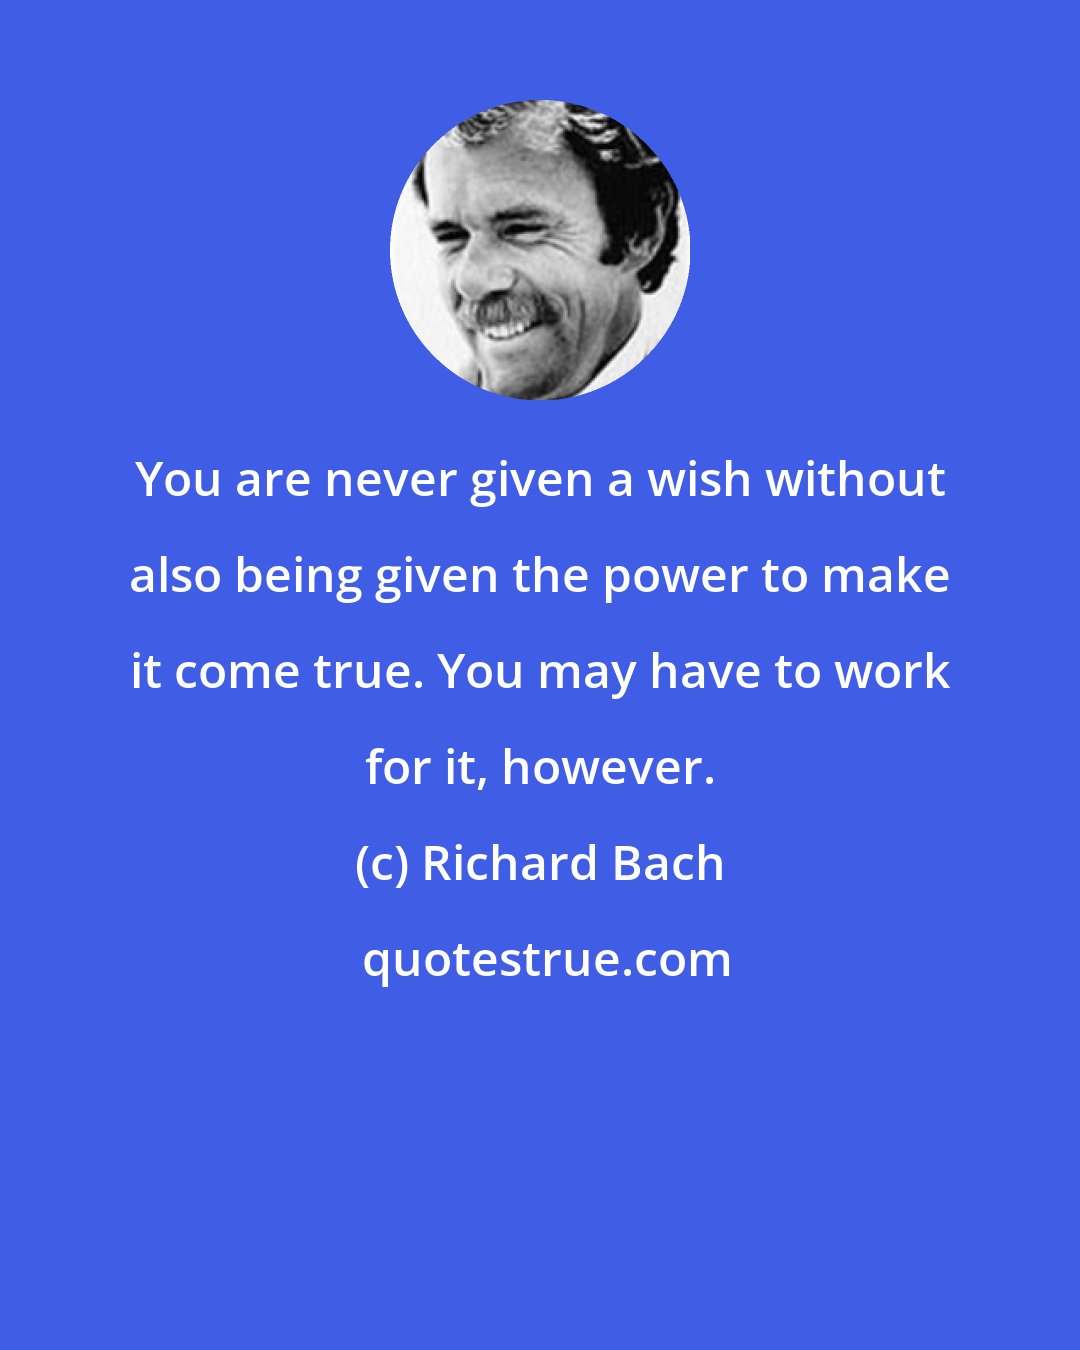 Richard Bach: You are never given a wish without also being given the power to make it come true. You may have to work for it, however.